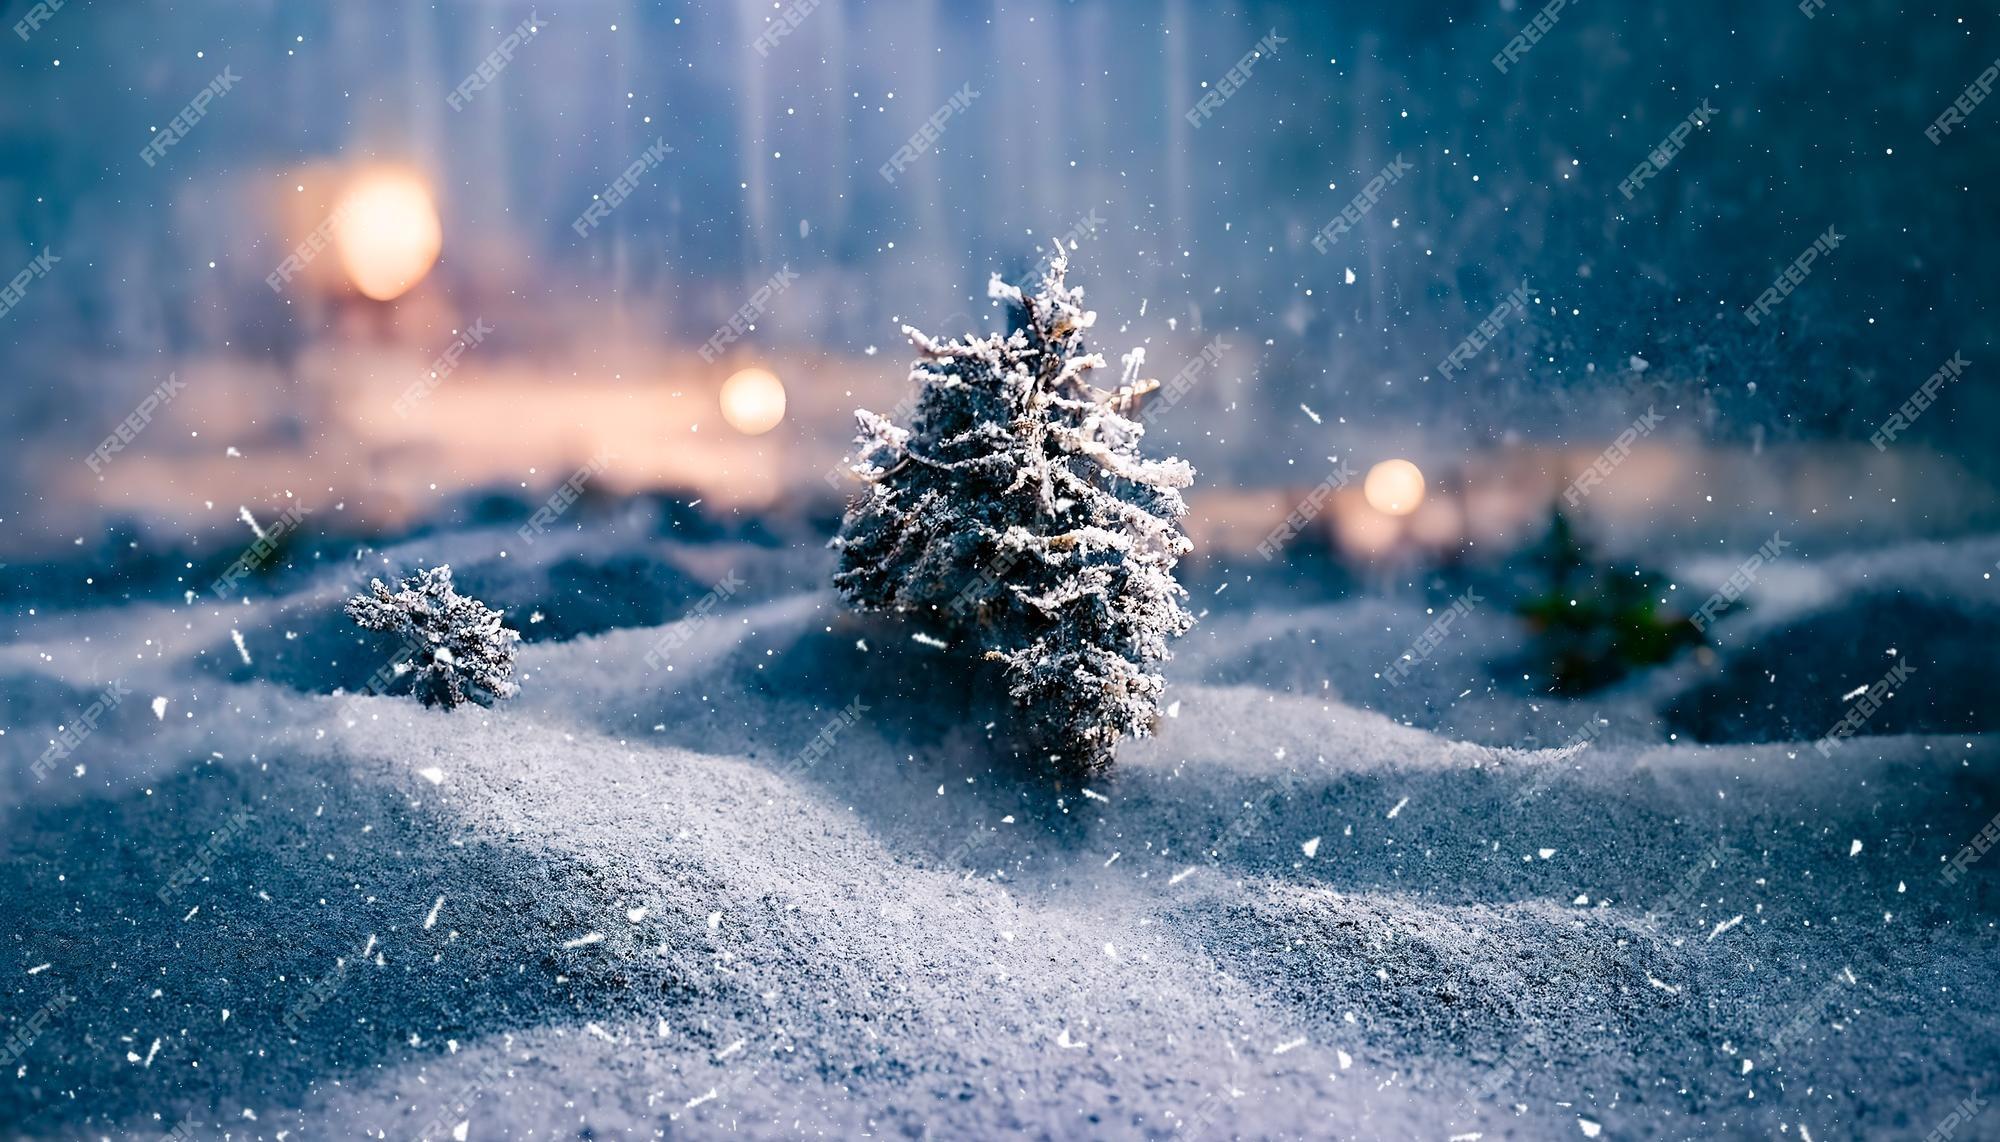 Premium Photo Winter landscape christmas trees in the snow